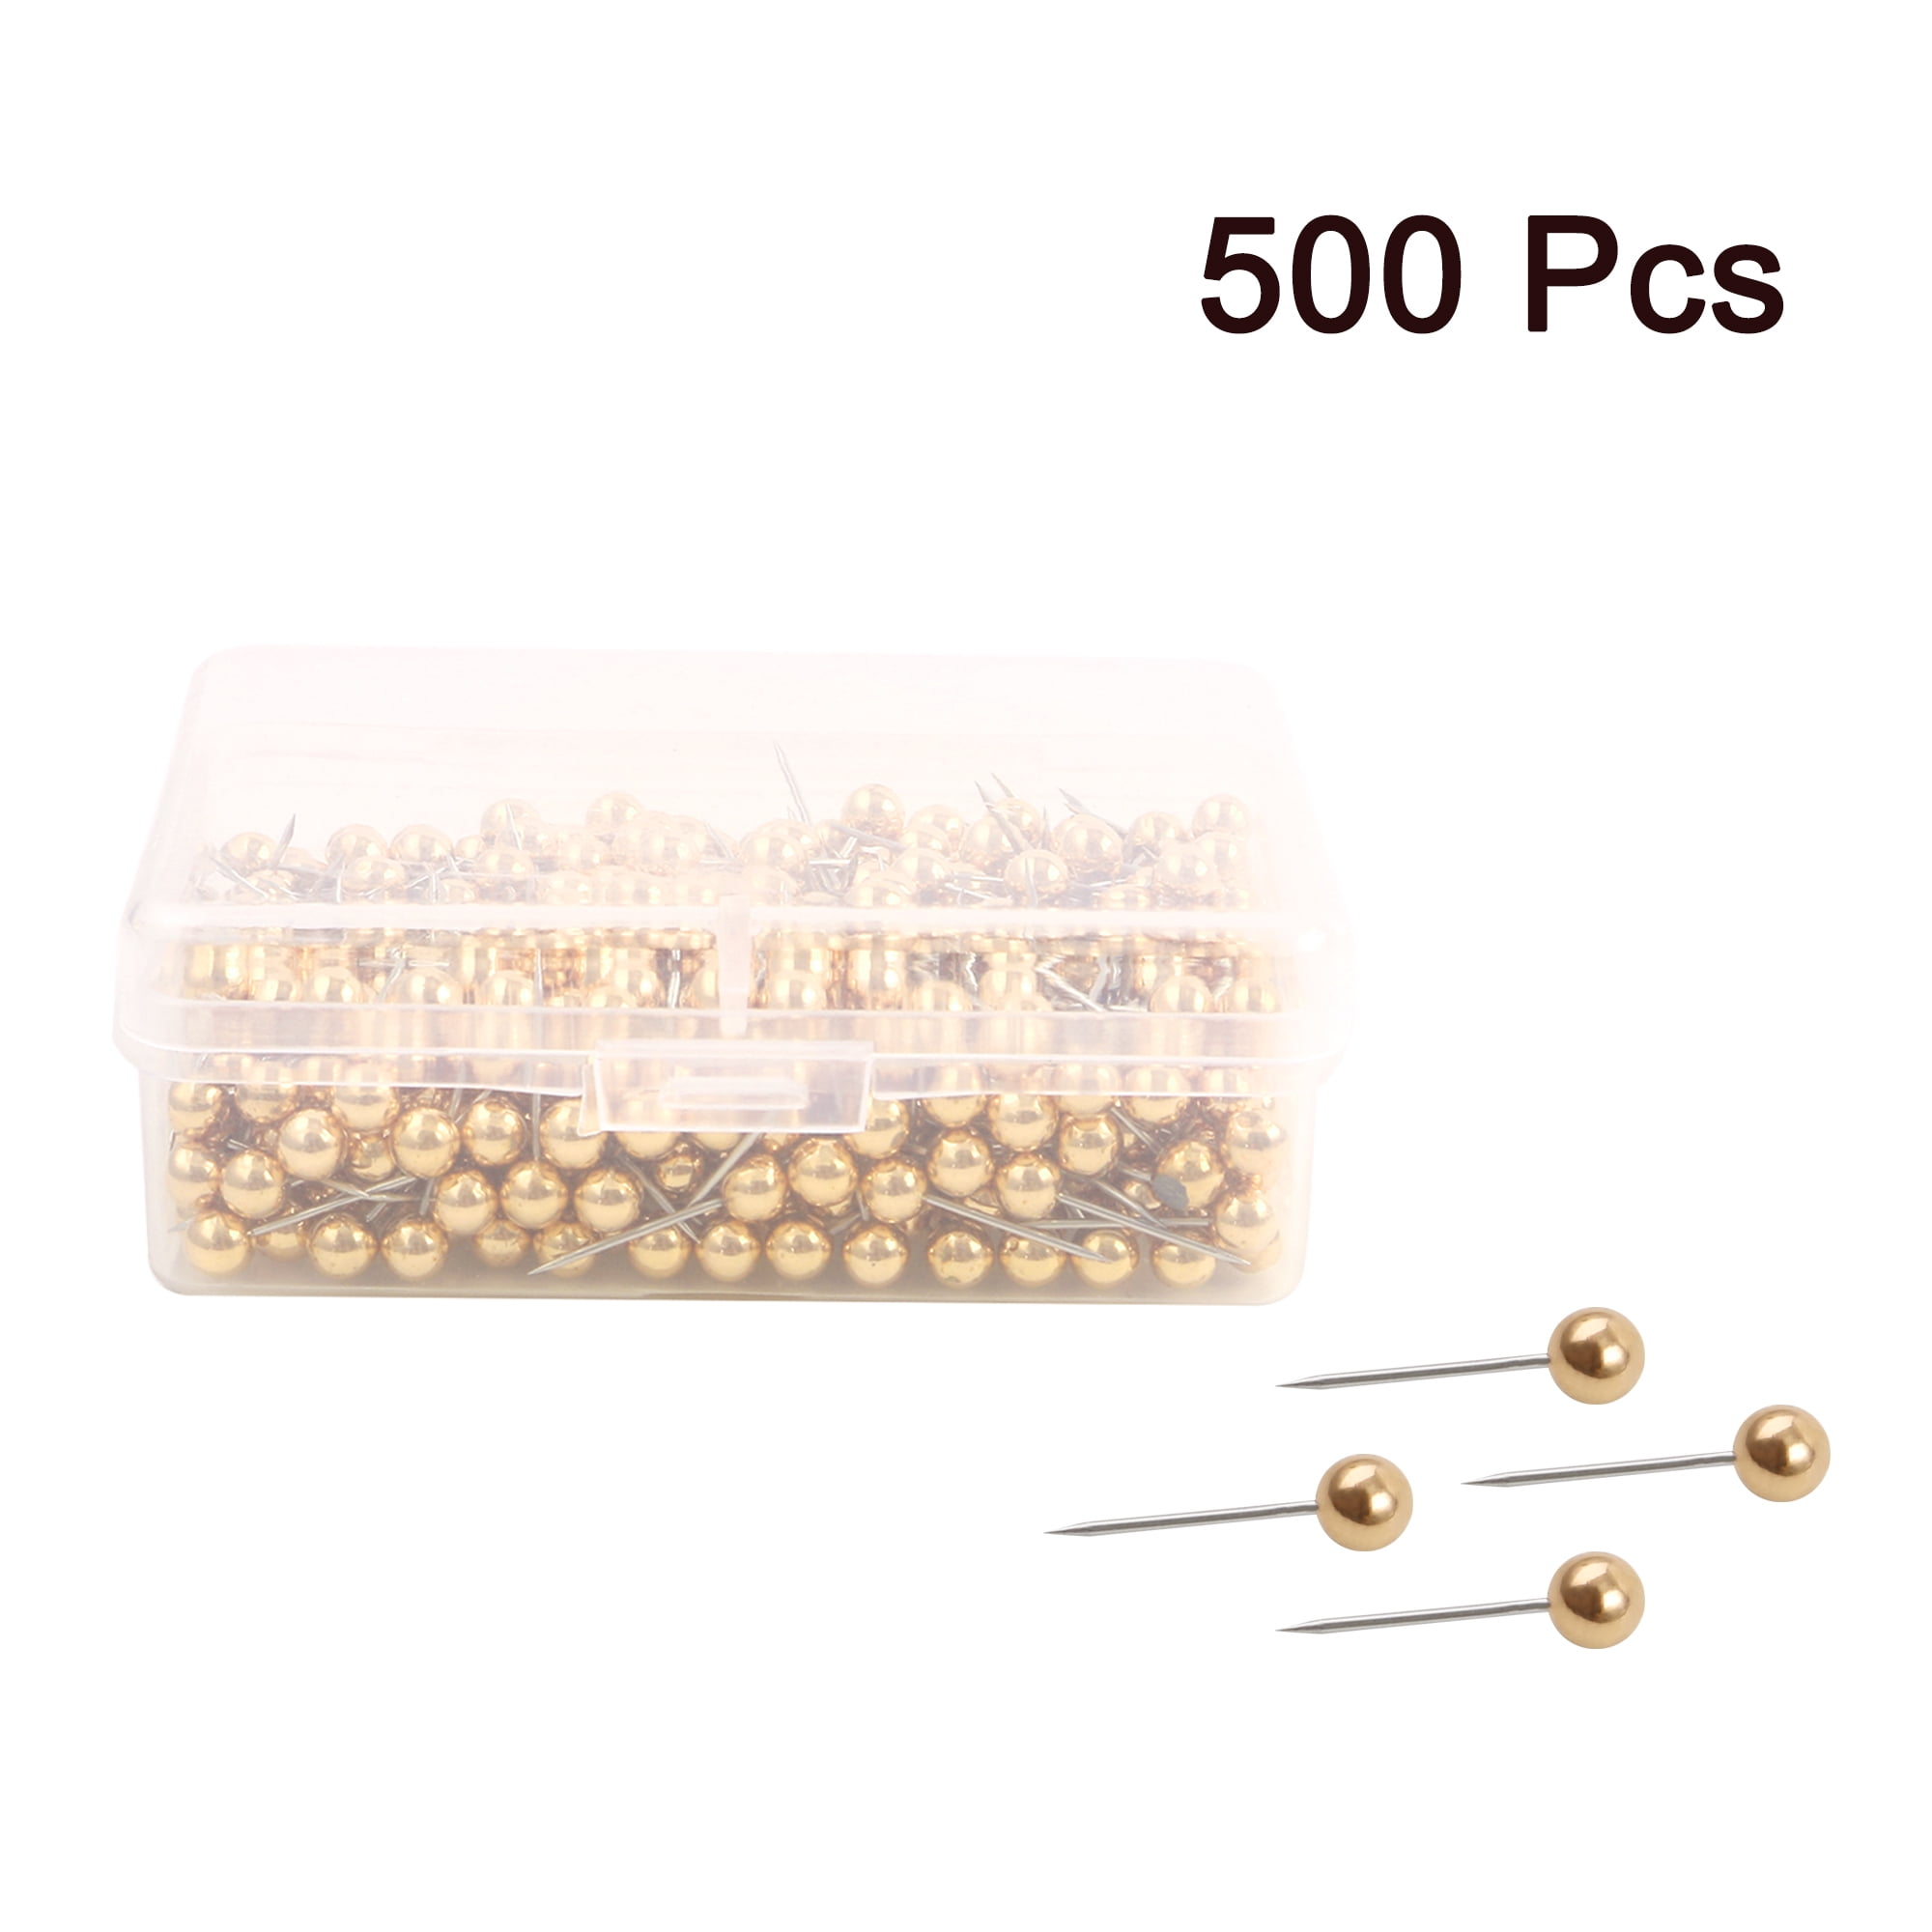 Outus Map Tacks Push Pins Plastic Head with Steel Point, 1/ 8 inch, 500 Pieces